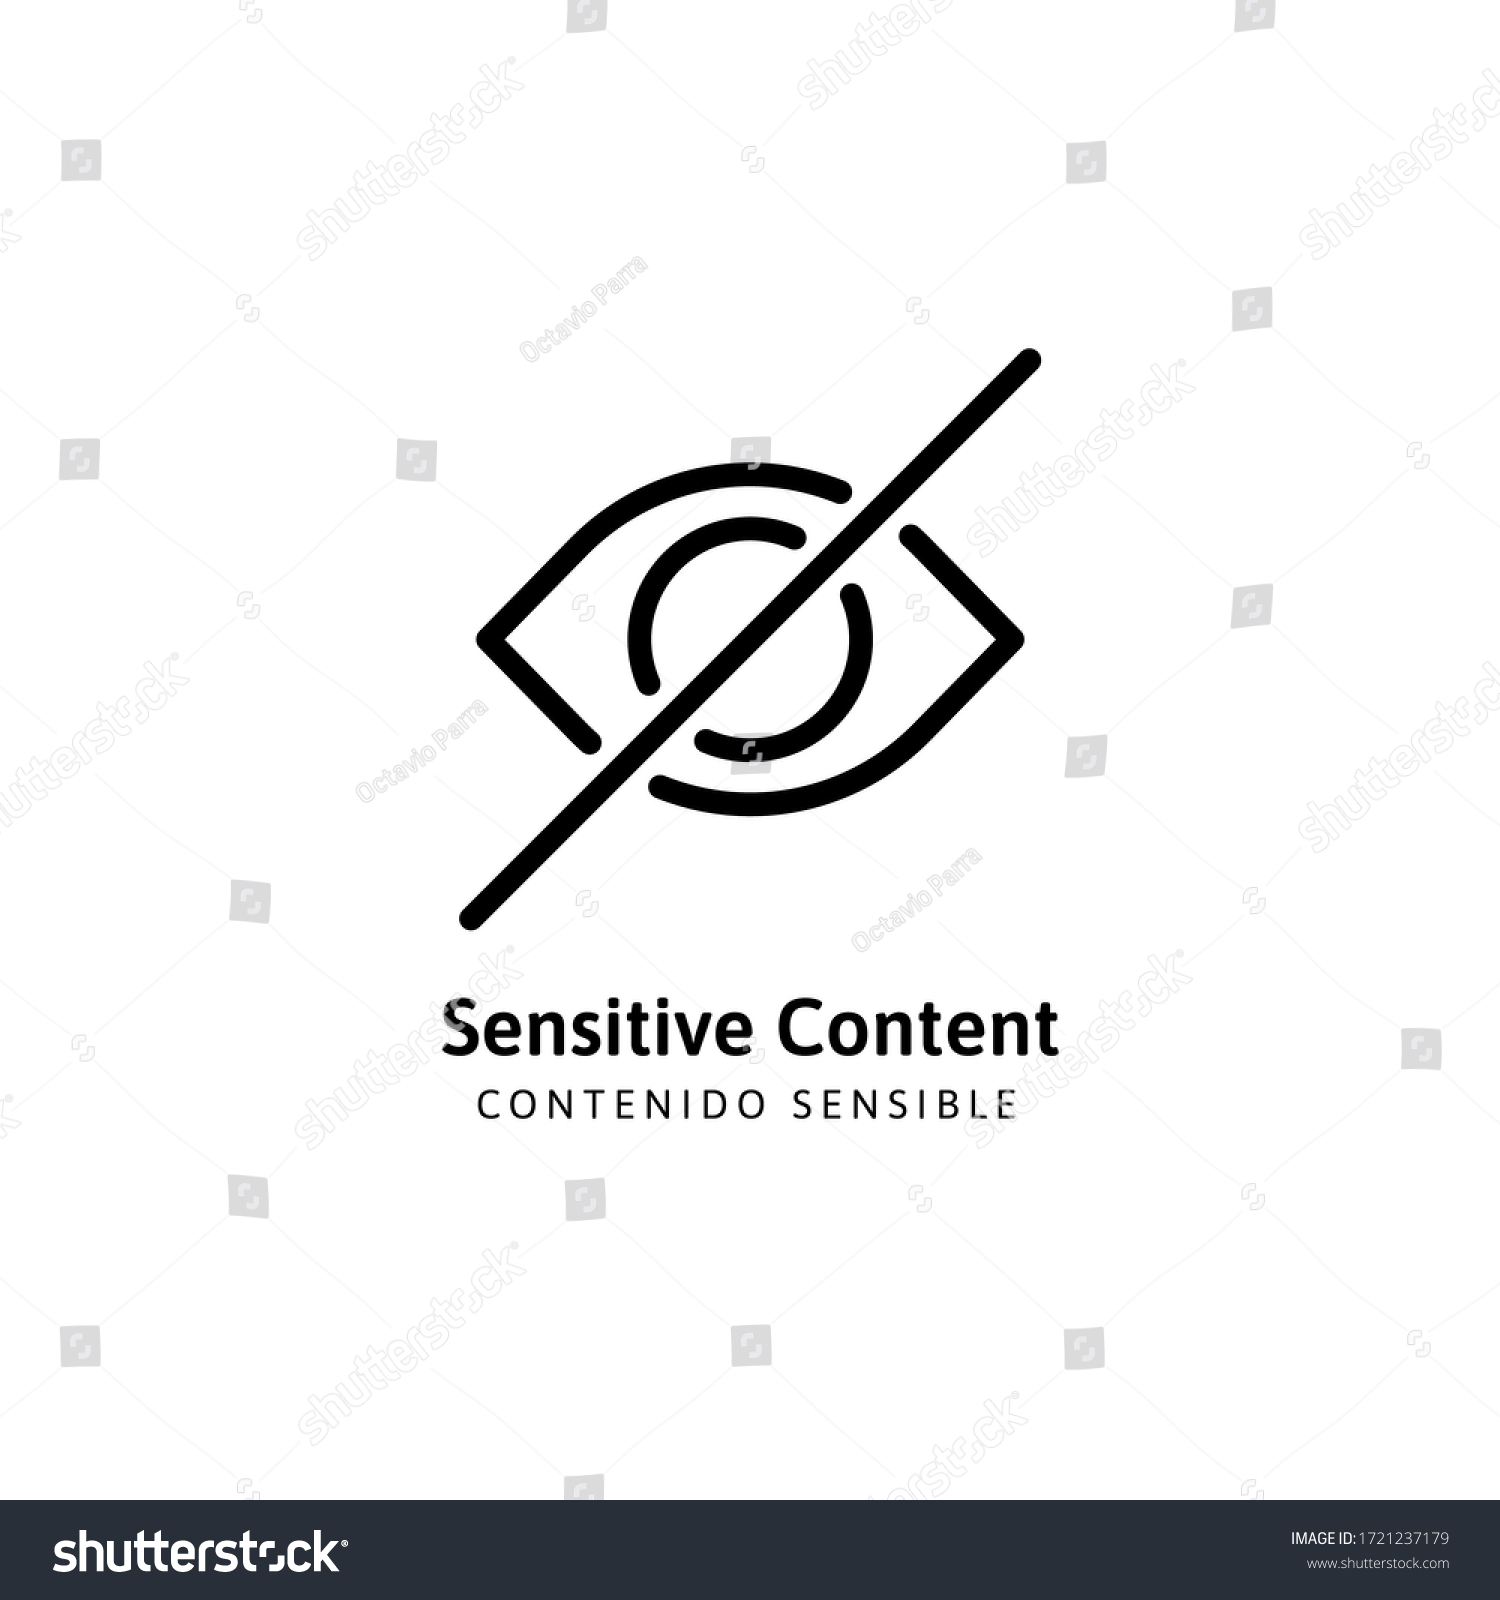 SVG of Eye. Caution. Icon for sensitive photo content or explicit video content, inappropriate content, internet safety concept, censored only adult 18 plus, attention Sign. Vector Illustration symbol. svg